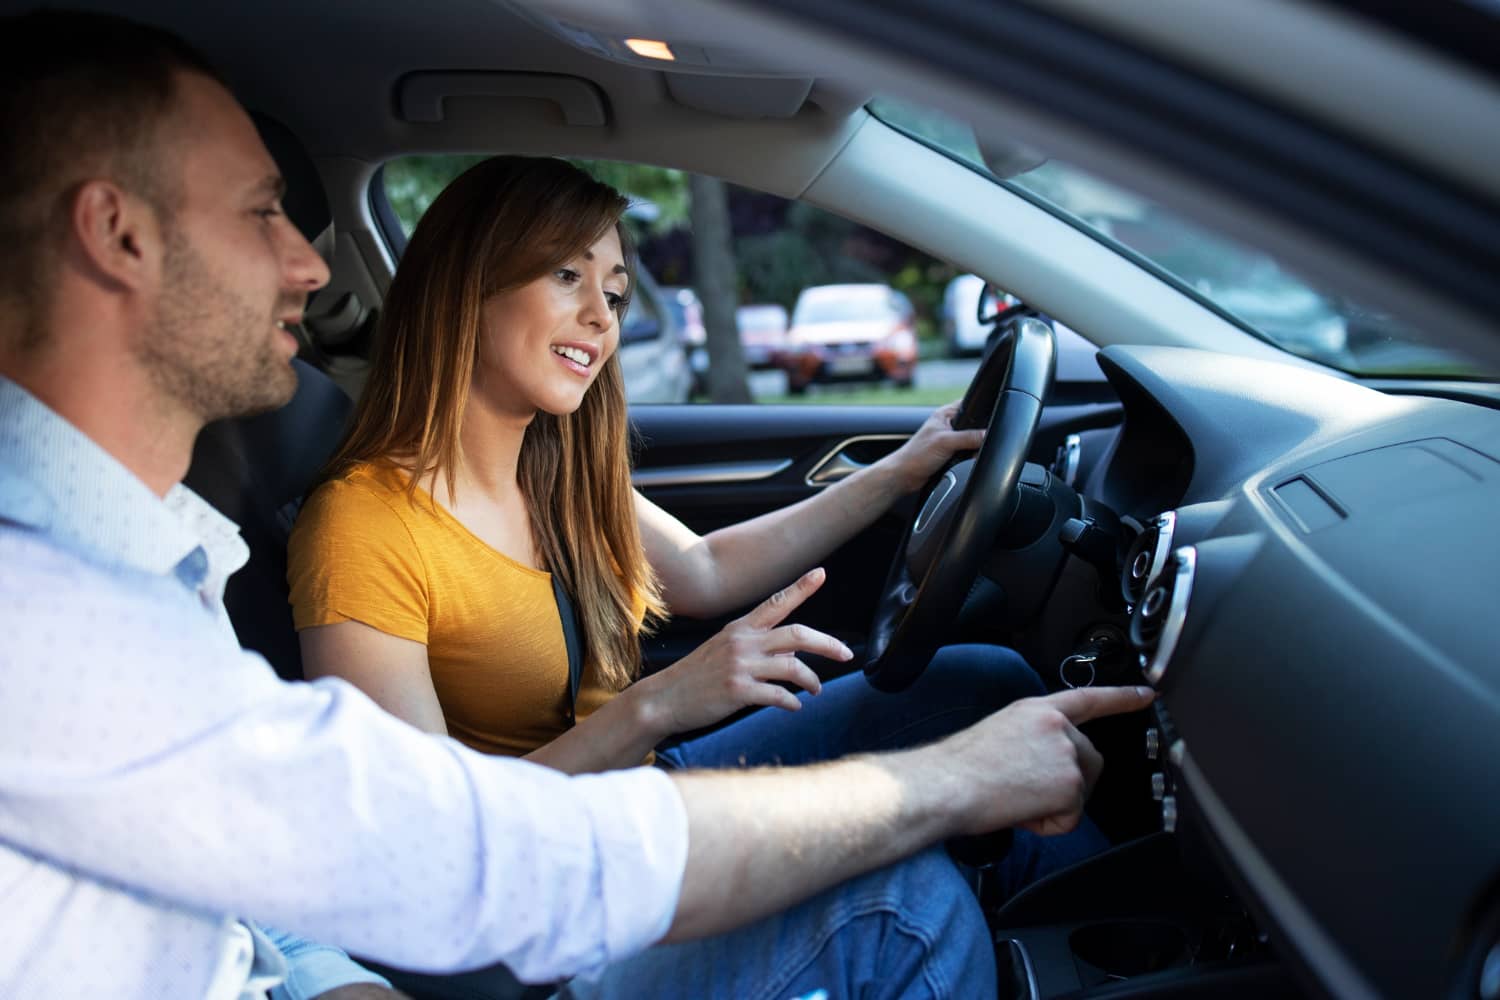 driving-instructor-training